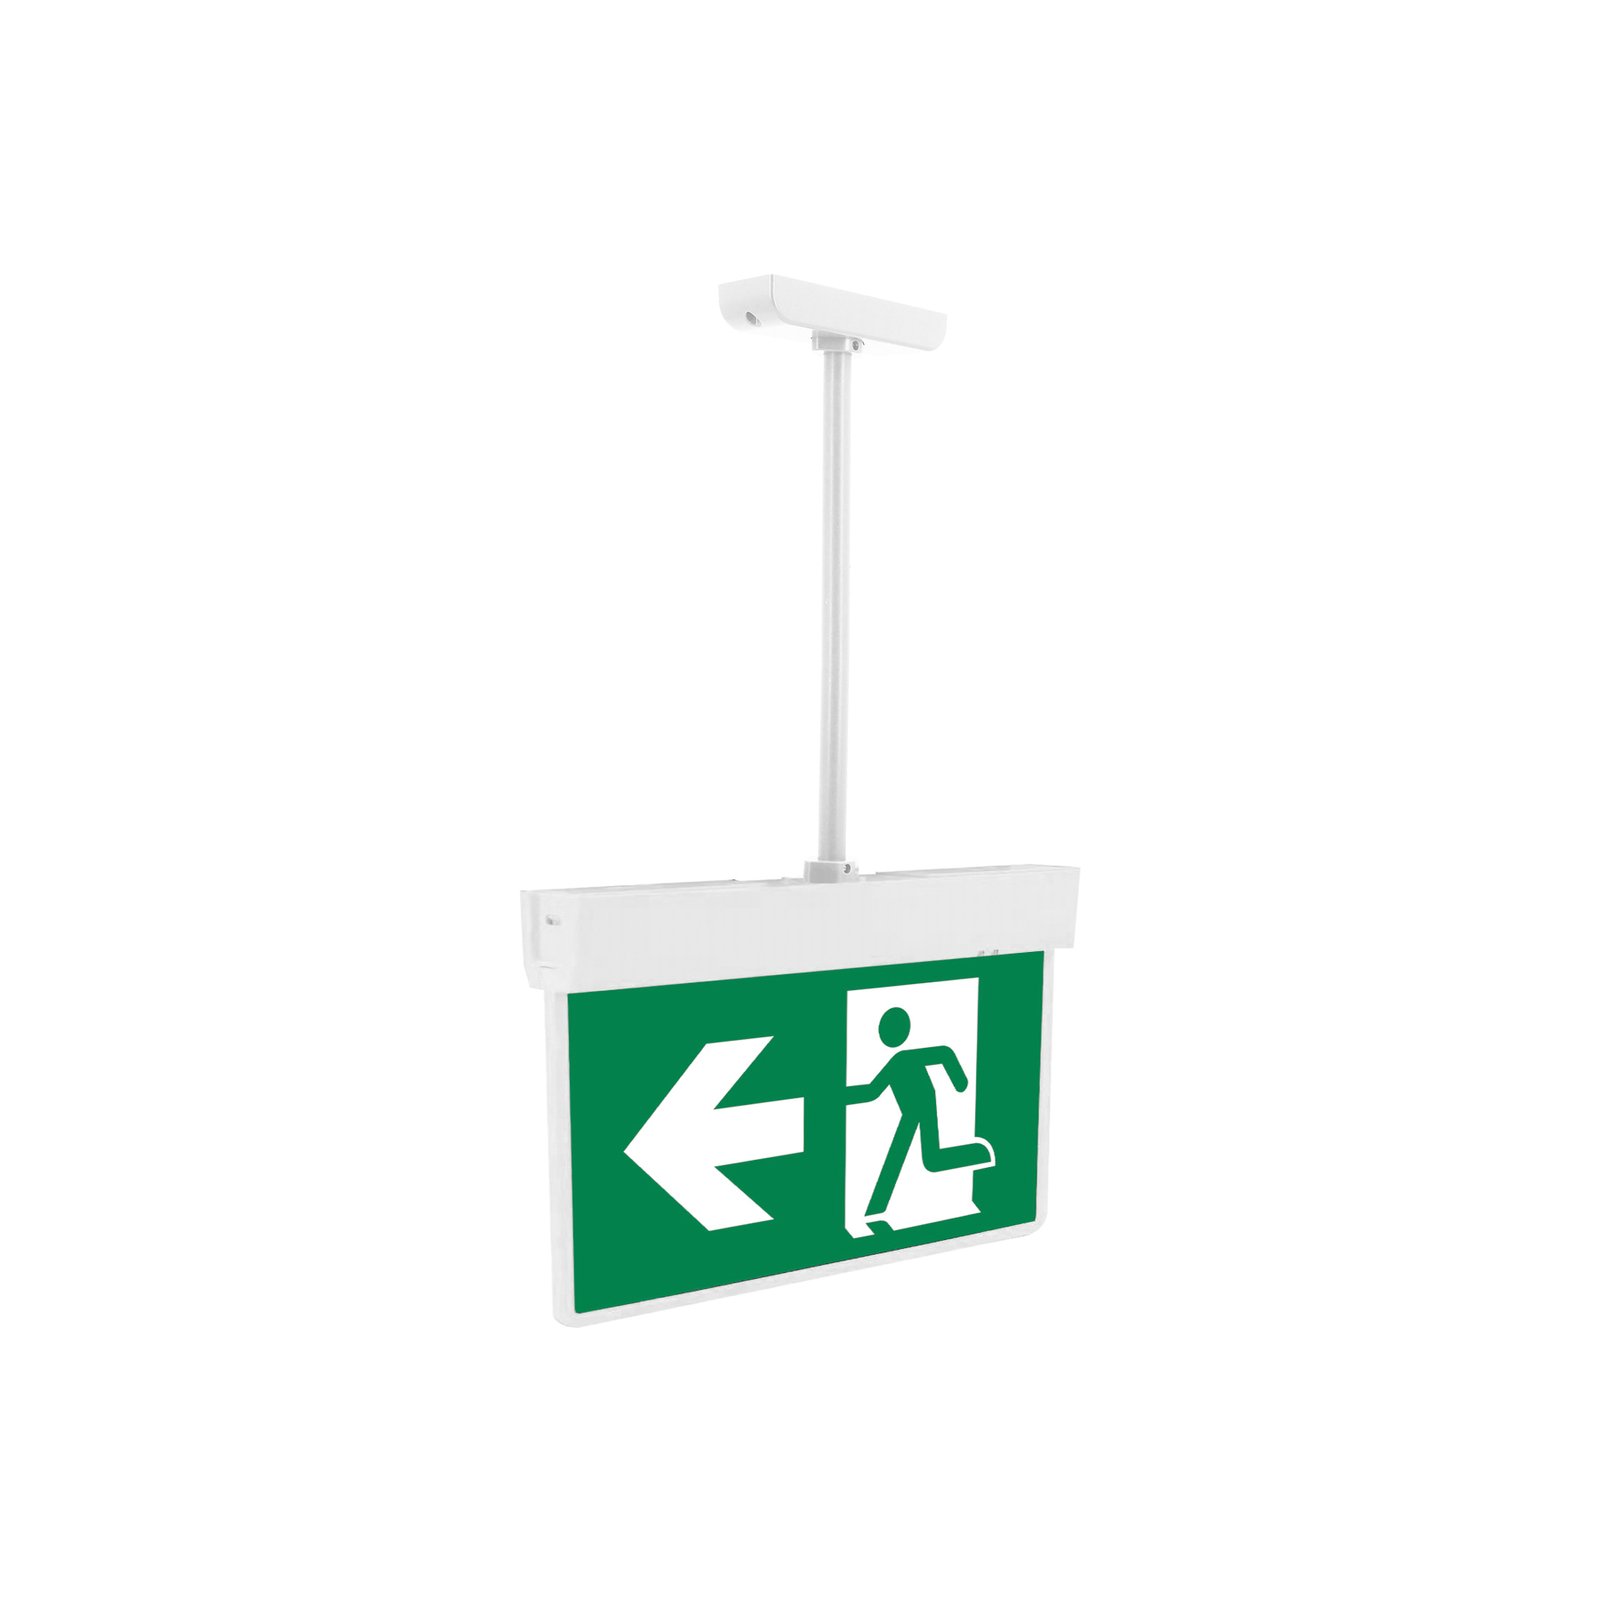 LED emergency exit light Hausen for wall and ceiling